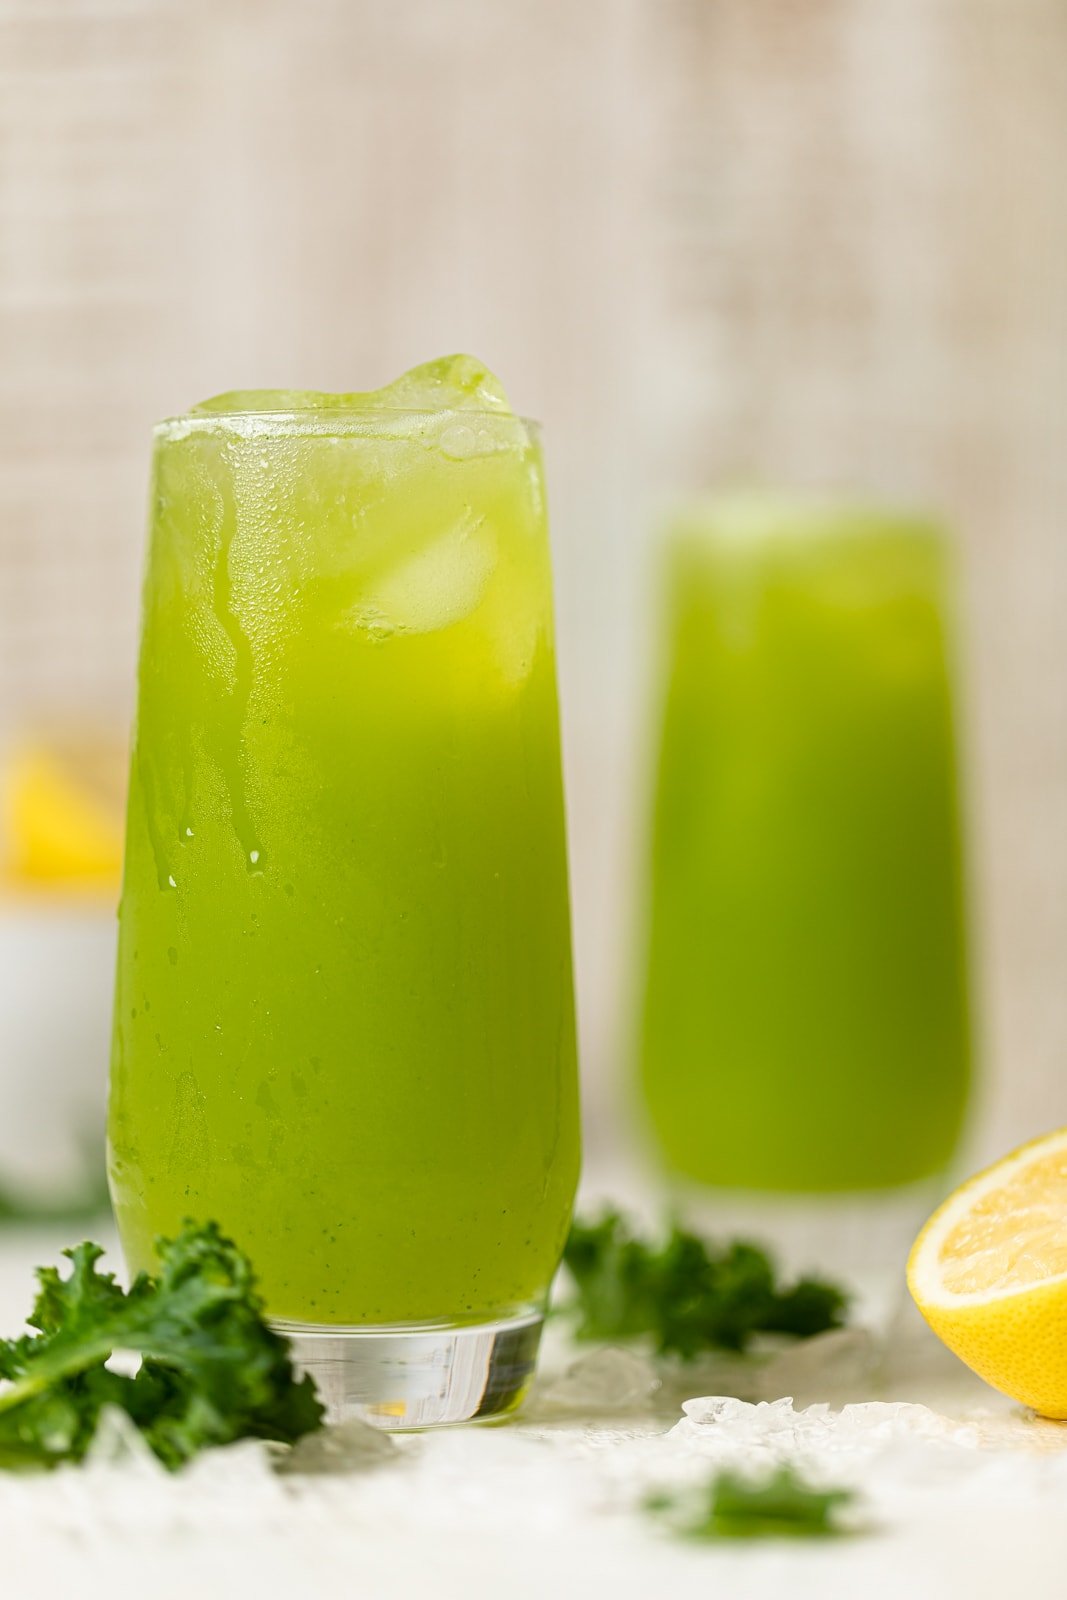 Two glasses of bright green Kale Lemonade next to kale, lemons, and ice